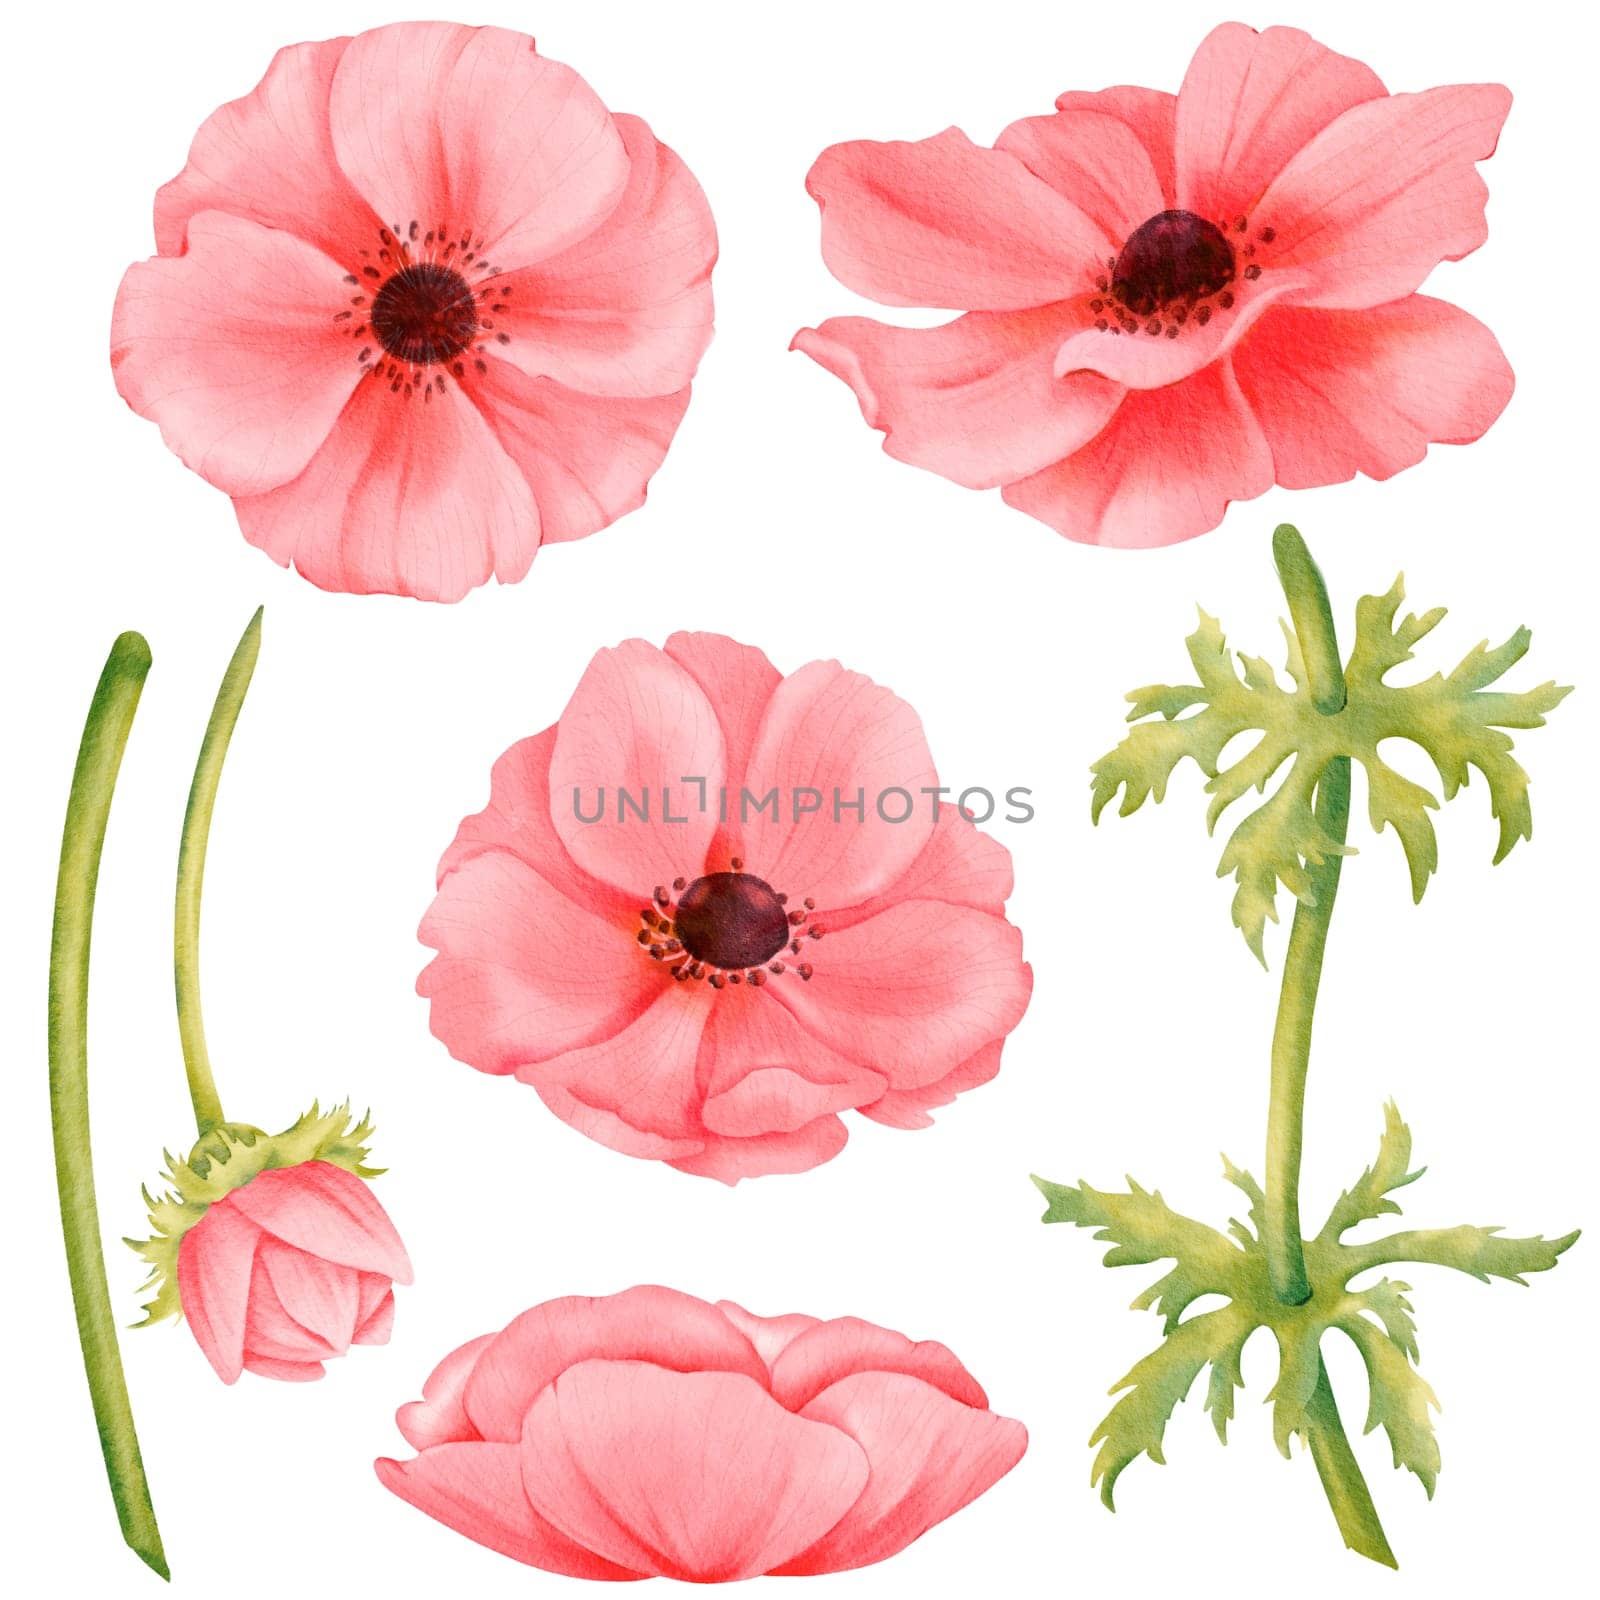 Watercolor flower assortment. Pink anemone construction kit. blossoms, bud, stems, and foliage. for greeting card designs, web layouts, printed materials, wallpapers, gift wrapping and accessories by Art_Mari_Ka